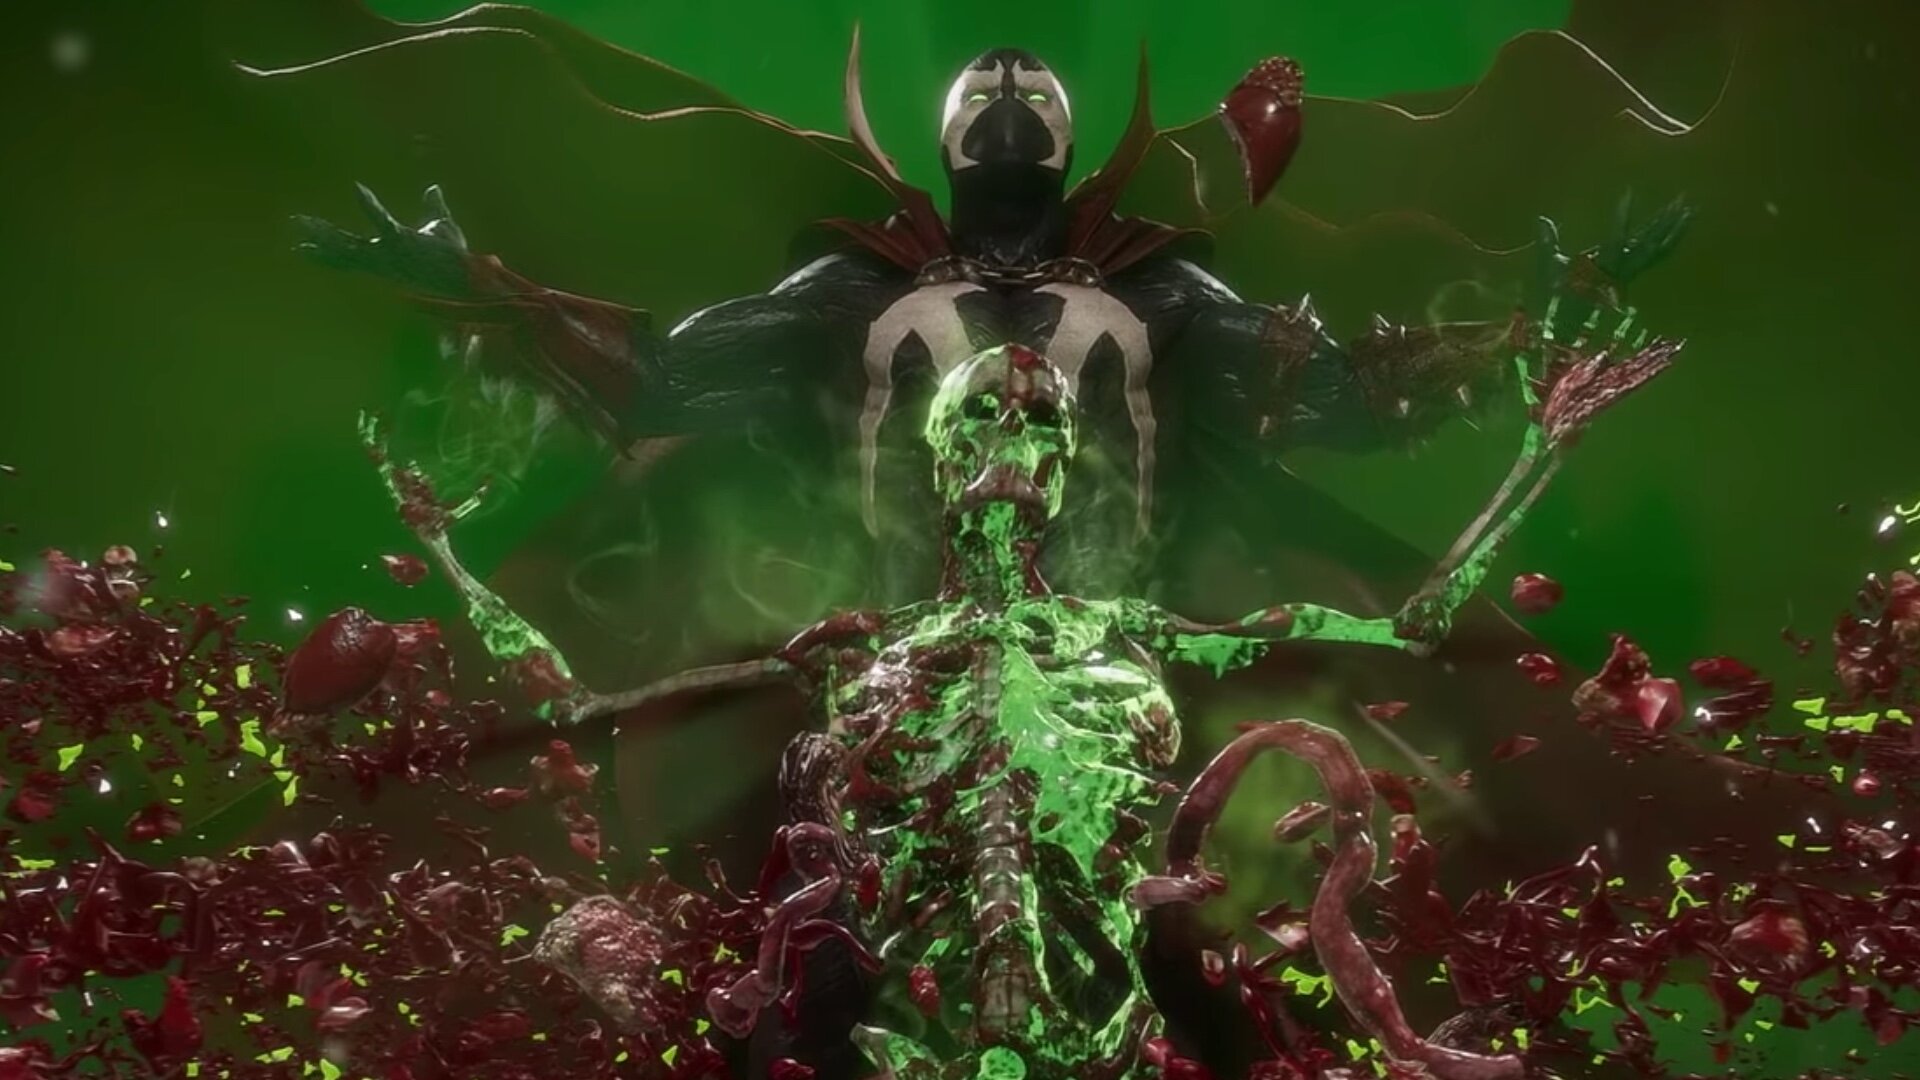 Wicked Cool Spawn Gameplay for MORTAL KOMBAT 11!